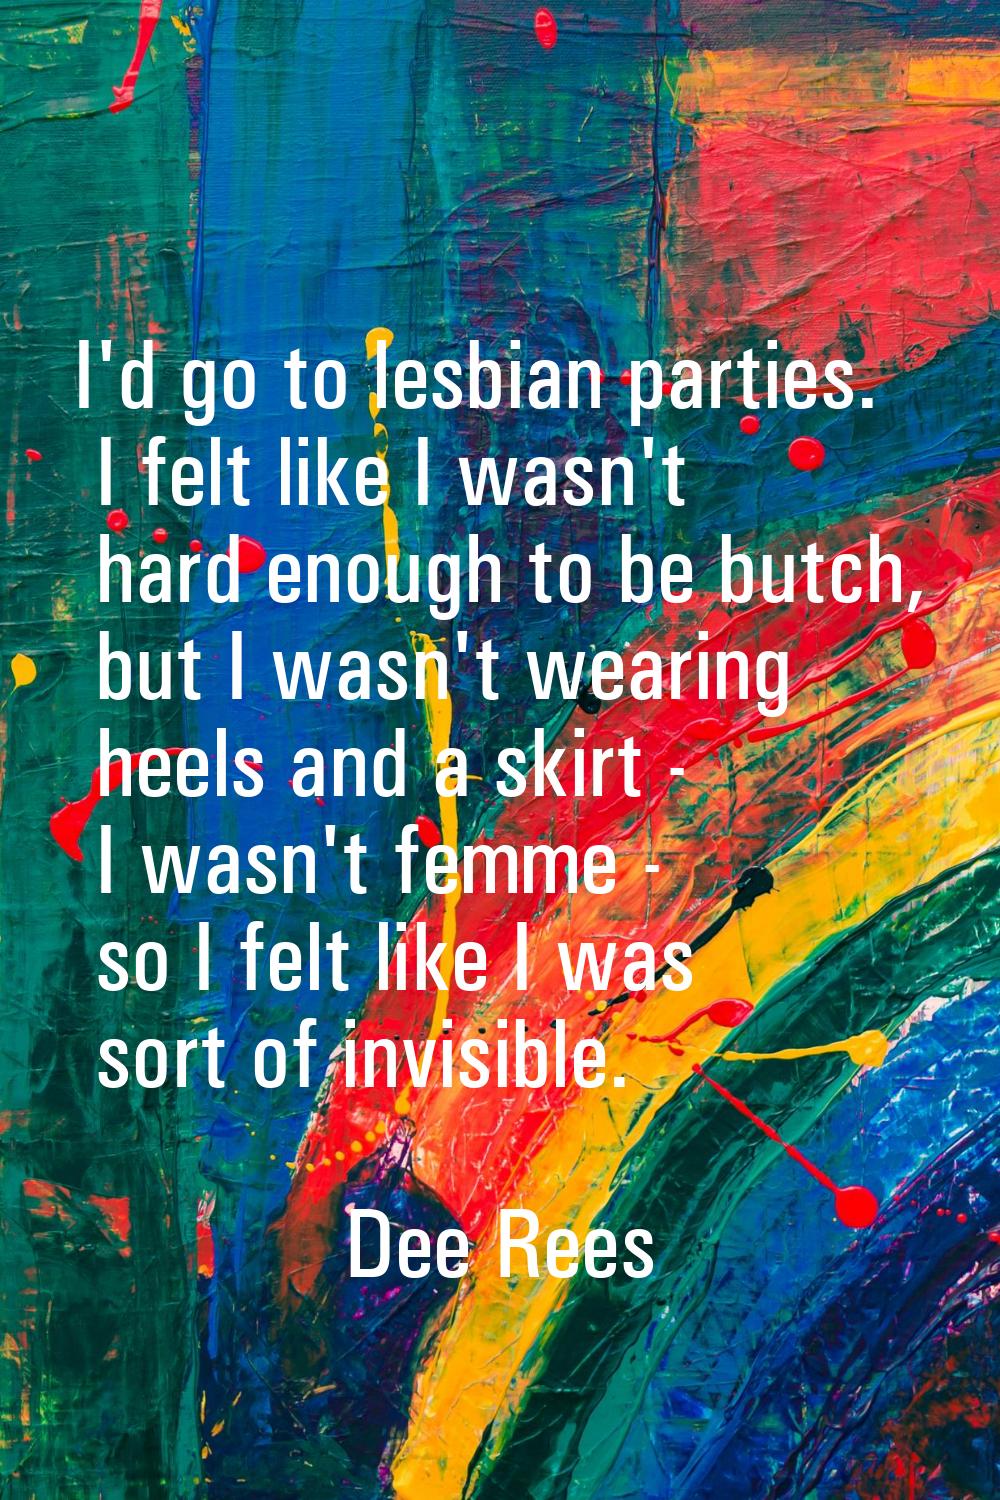 I'd go to lesbian parties. I felt like I wasn't hard enough to be butch, but I wasn't wearing heels